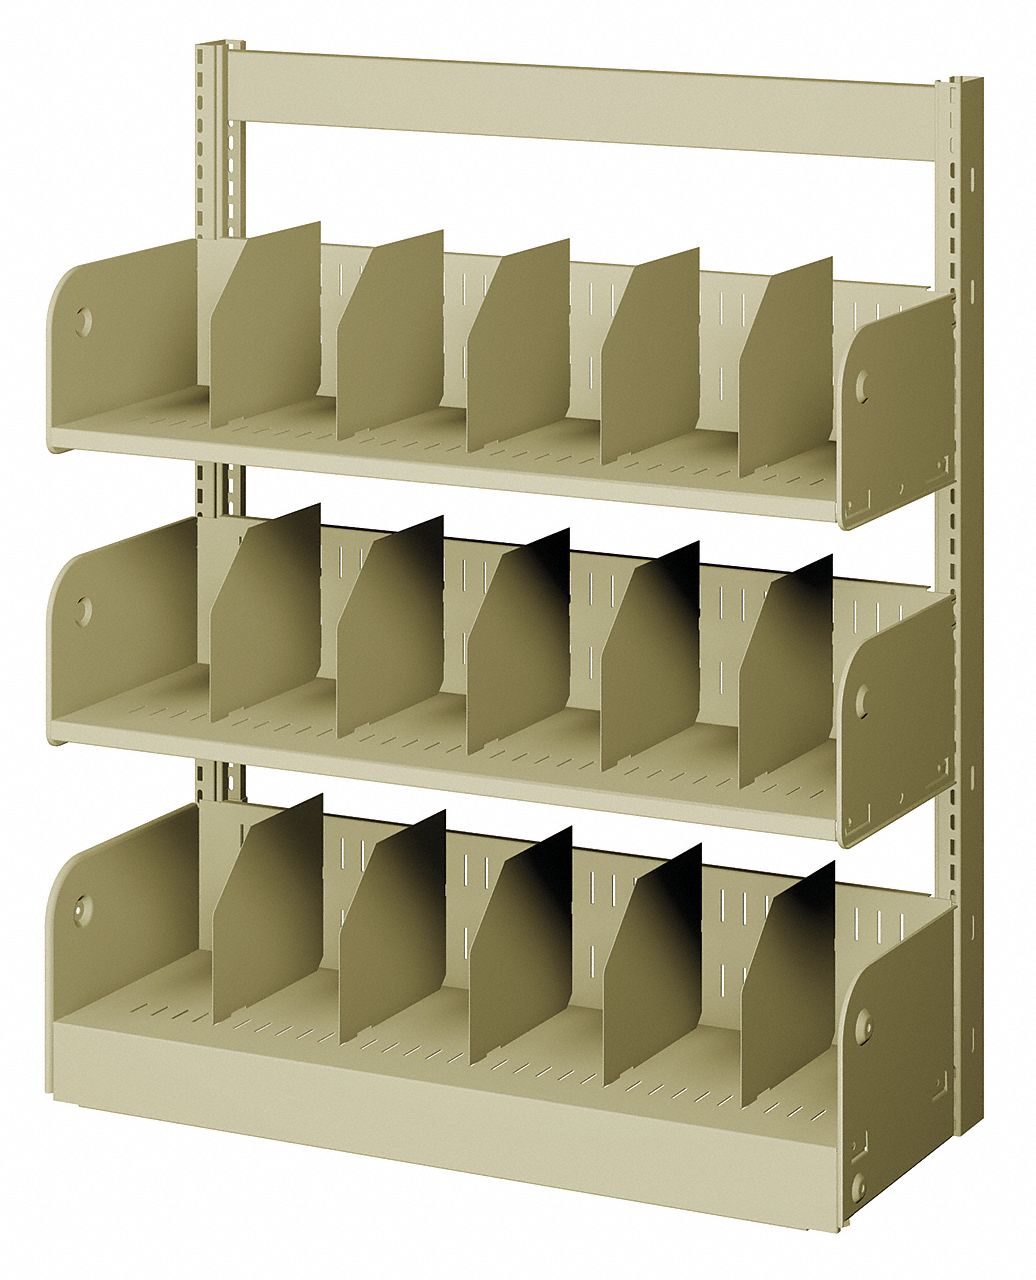 Divider Library Shelving: Single Face Starter, 3 Shelves, 42 in Ht, 36 in Wd, 12 in Nominal